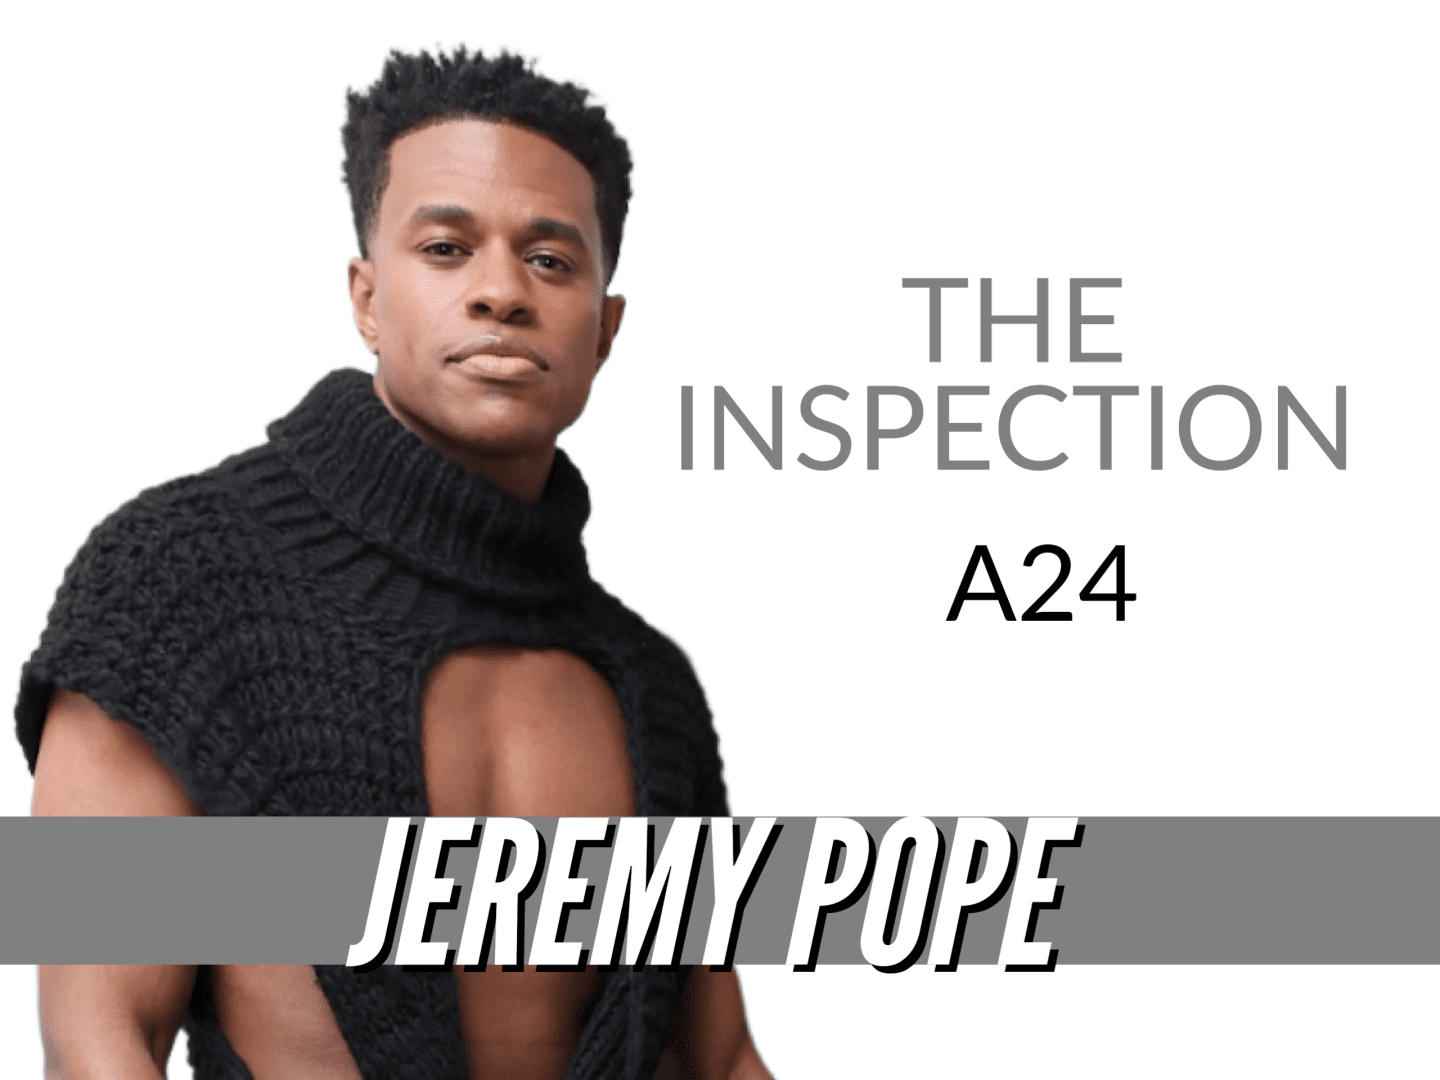 Jeremy Pope explains why protecting the story was important in 'The Inspection'